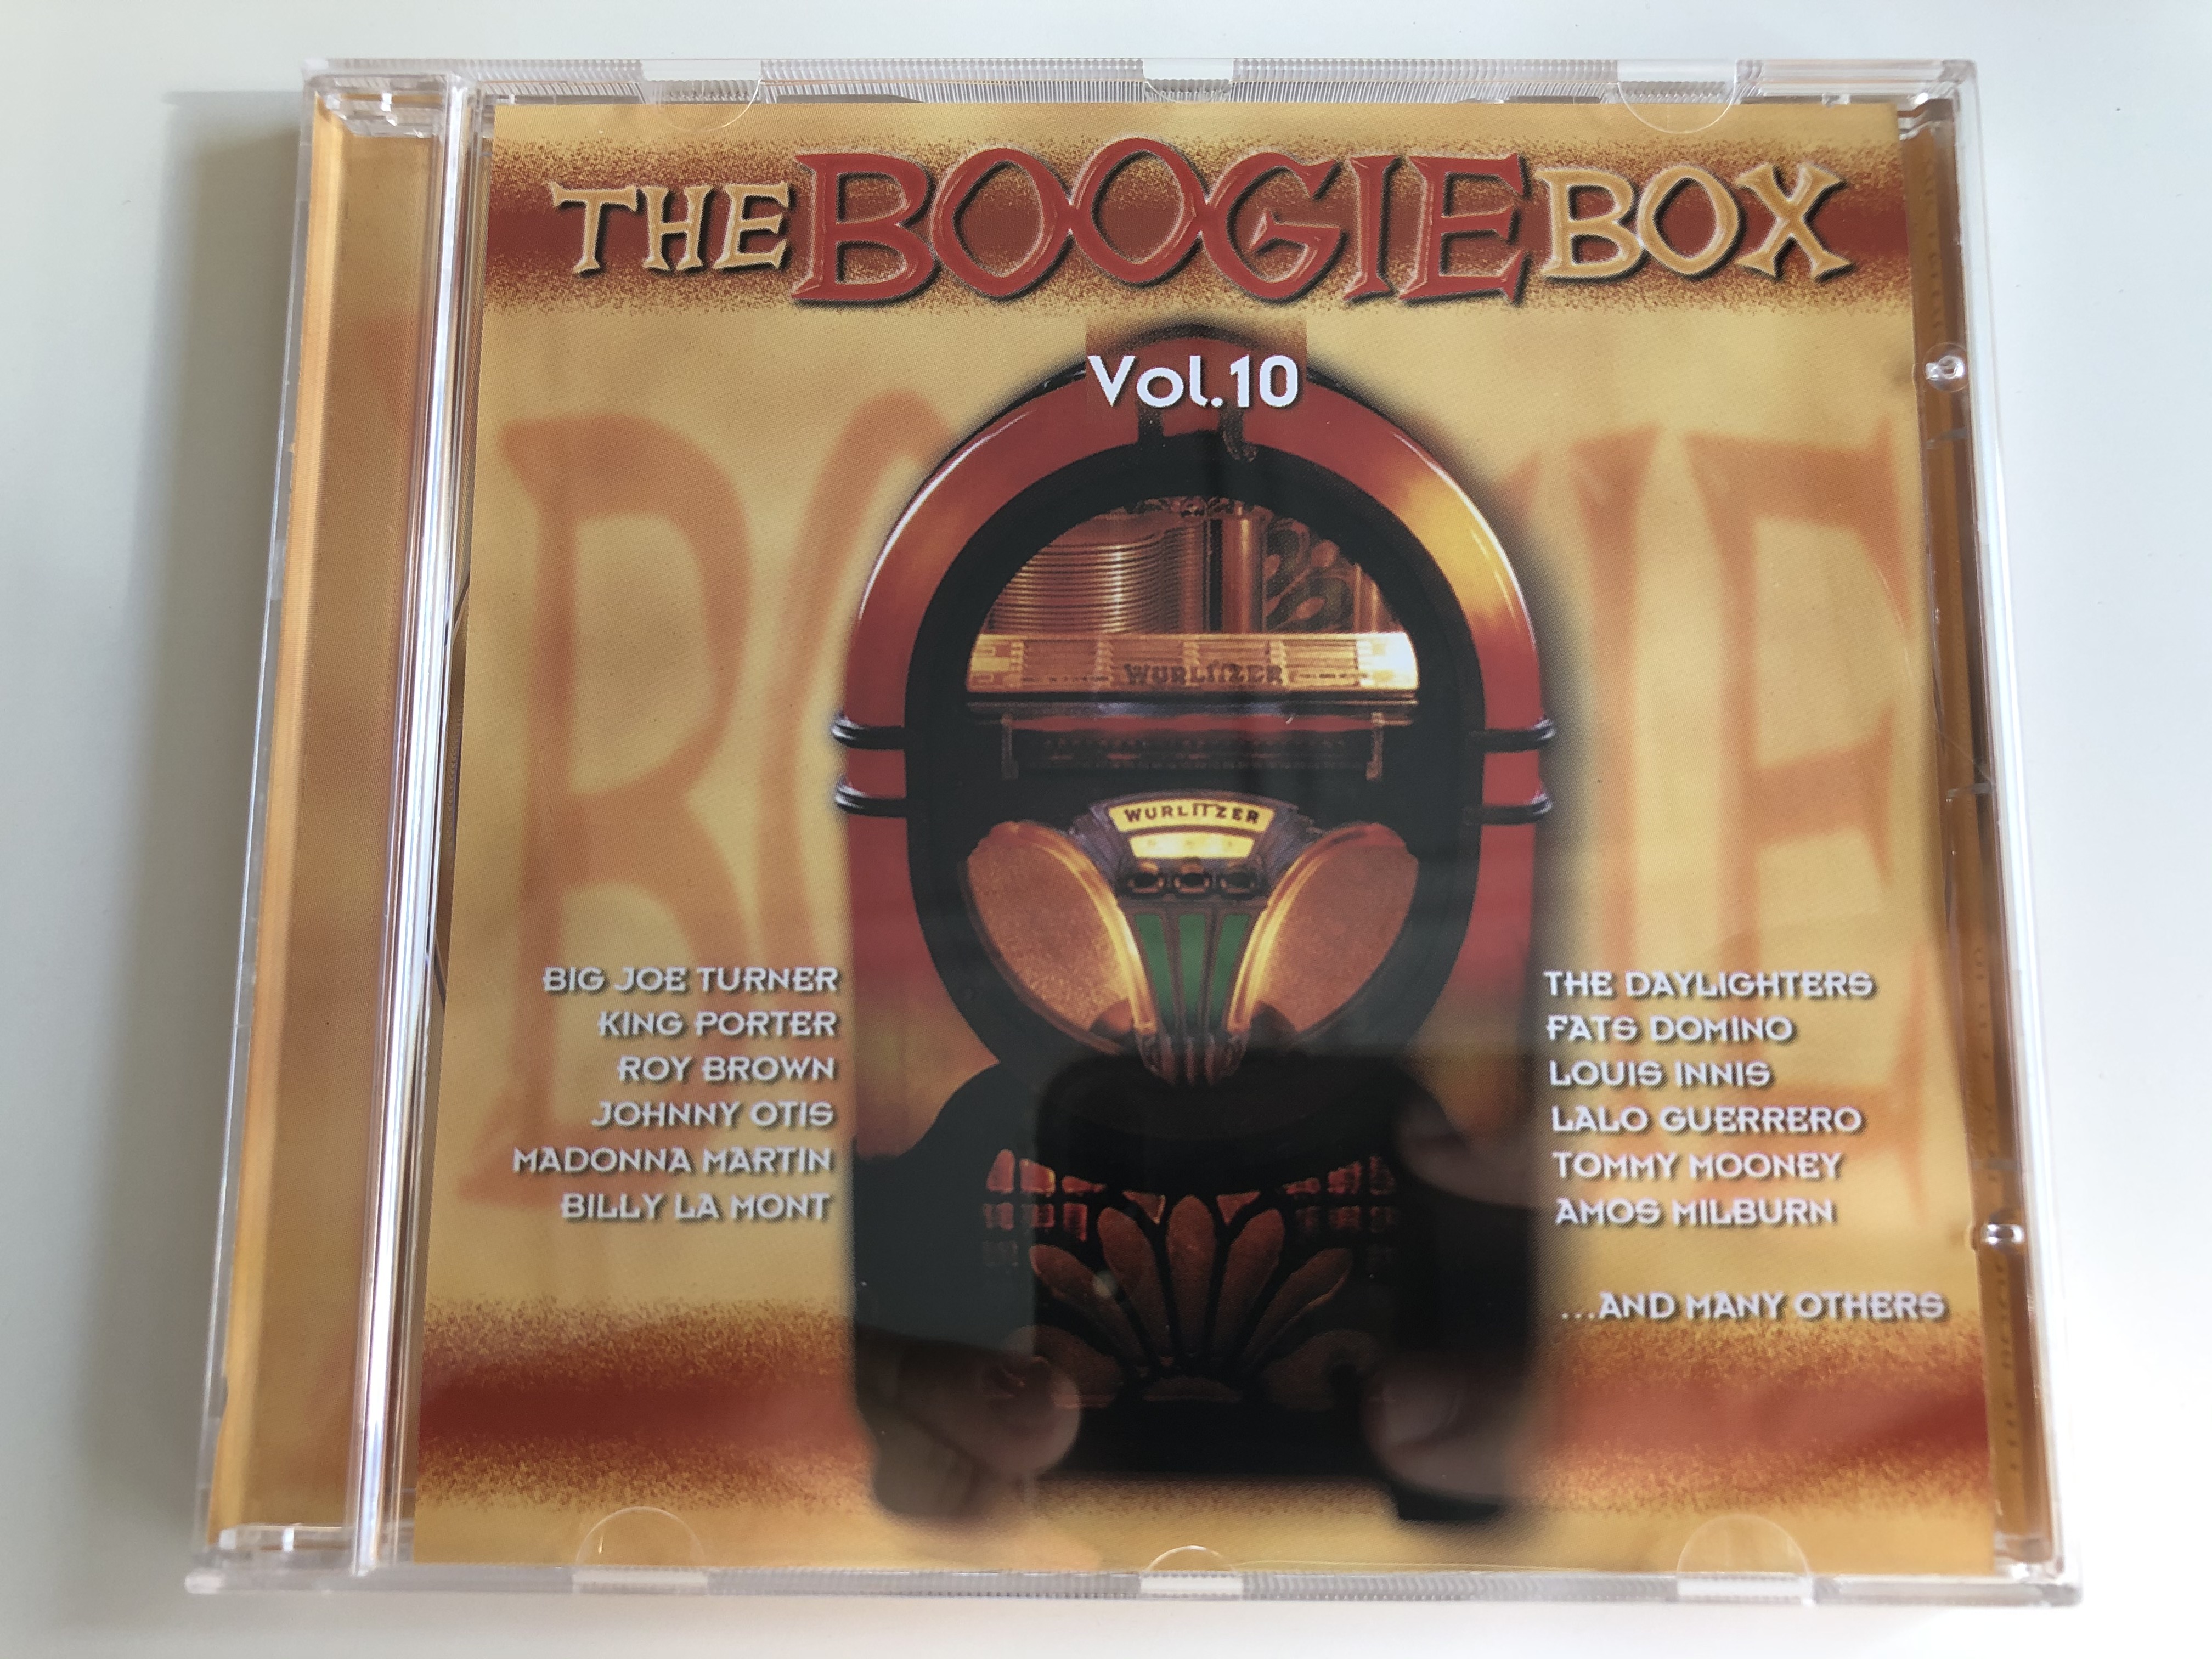 the-boogie-box-vol.-10-big-joe-turner-king-porter-roy-brown-johnny-otis-madonna-martin-billy-la-mont-the-daylighters-fats-domino-louis-innis-lalo-guerrero-tommy-mooney-amos-milburn-and-many-others-1-.jpg